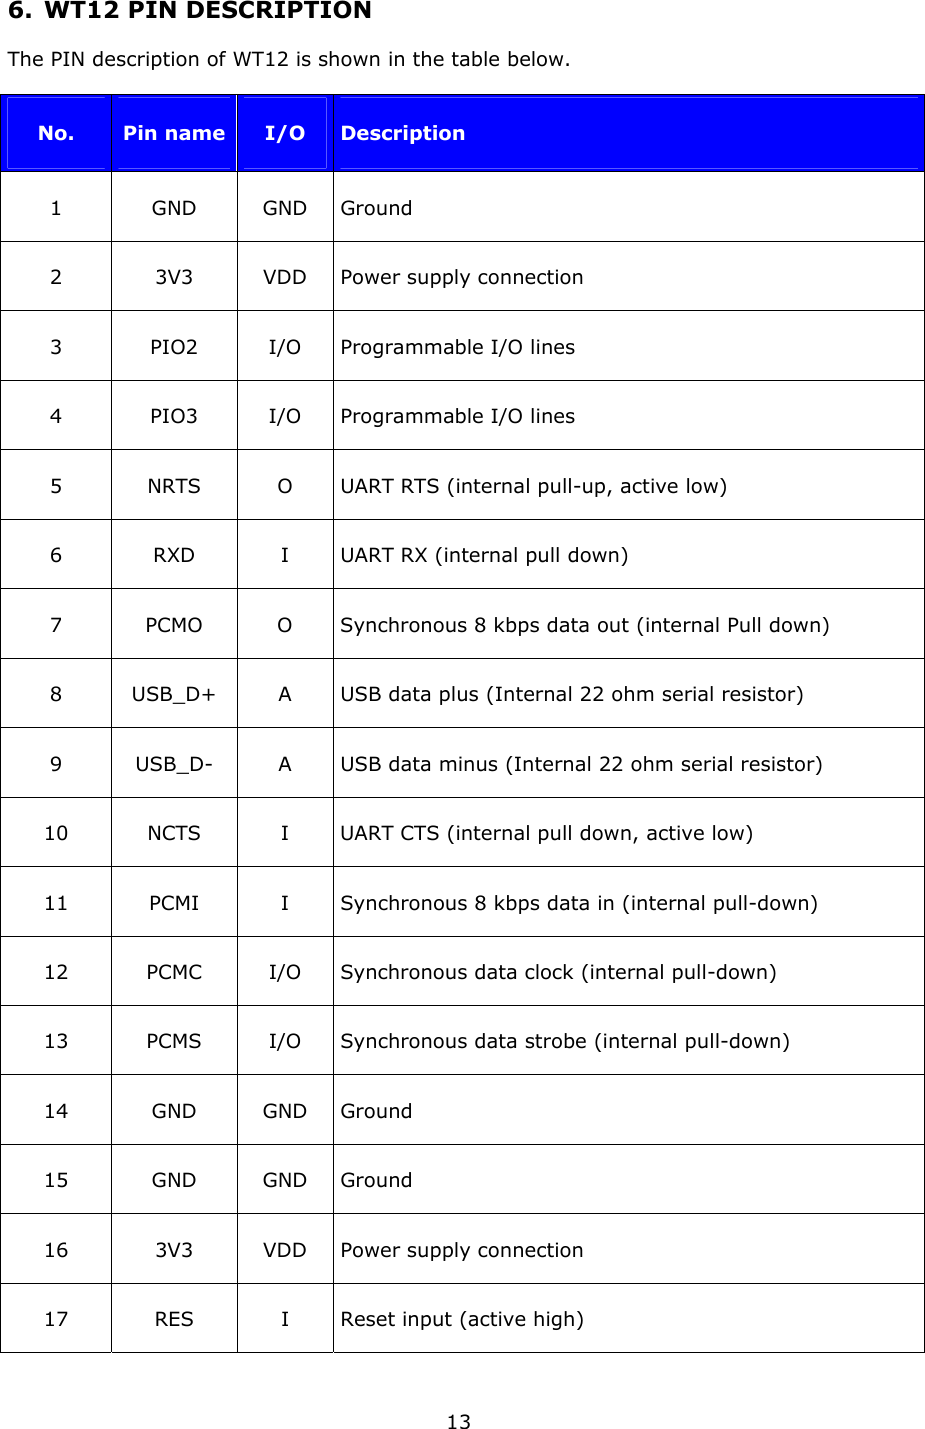   136. WT12 PIN DESCRIPTION The PIN description of WT12 is shown in the table below.  No.  Pin name  I/O  Description 1 GND GND Ground 2 3V3 VDD Power supply connection 3  PIO2  I/O  Programmable I/O lines 4  PIO3  I/O  Programmable I/O lines 5  NRTS  O  UART RTS (internal pull-up, active low) 6  RXD  I  UART RX (internal pull down) 7  PCMO  O  Synchronous 8 kbps data out (internal Pull down) 8  USB_D+  A  USB data plus (Internal 22 ohm serial resistor) 9  USB_D-  A  USB data minus (Internal 22 ohm serial resistor) 10  NCTS  I  UART CTS (internal pull down, active low) 11  PCMI  I  Synchronous 8 kbps data in (internal pull-down) 12 PCMC I/O Synchronous data clock (internal pull-down) 13  PCMS  I/O  Synchronous data strobe (internal pull-down) 14 GND GND Ground 15 GND GND Ground 16 3V3 VDD Power supply connection 17 RES I Reset input (active high) 